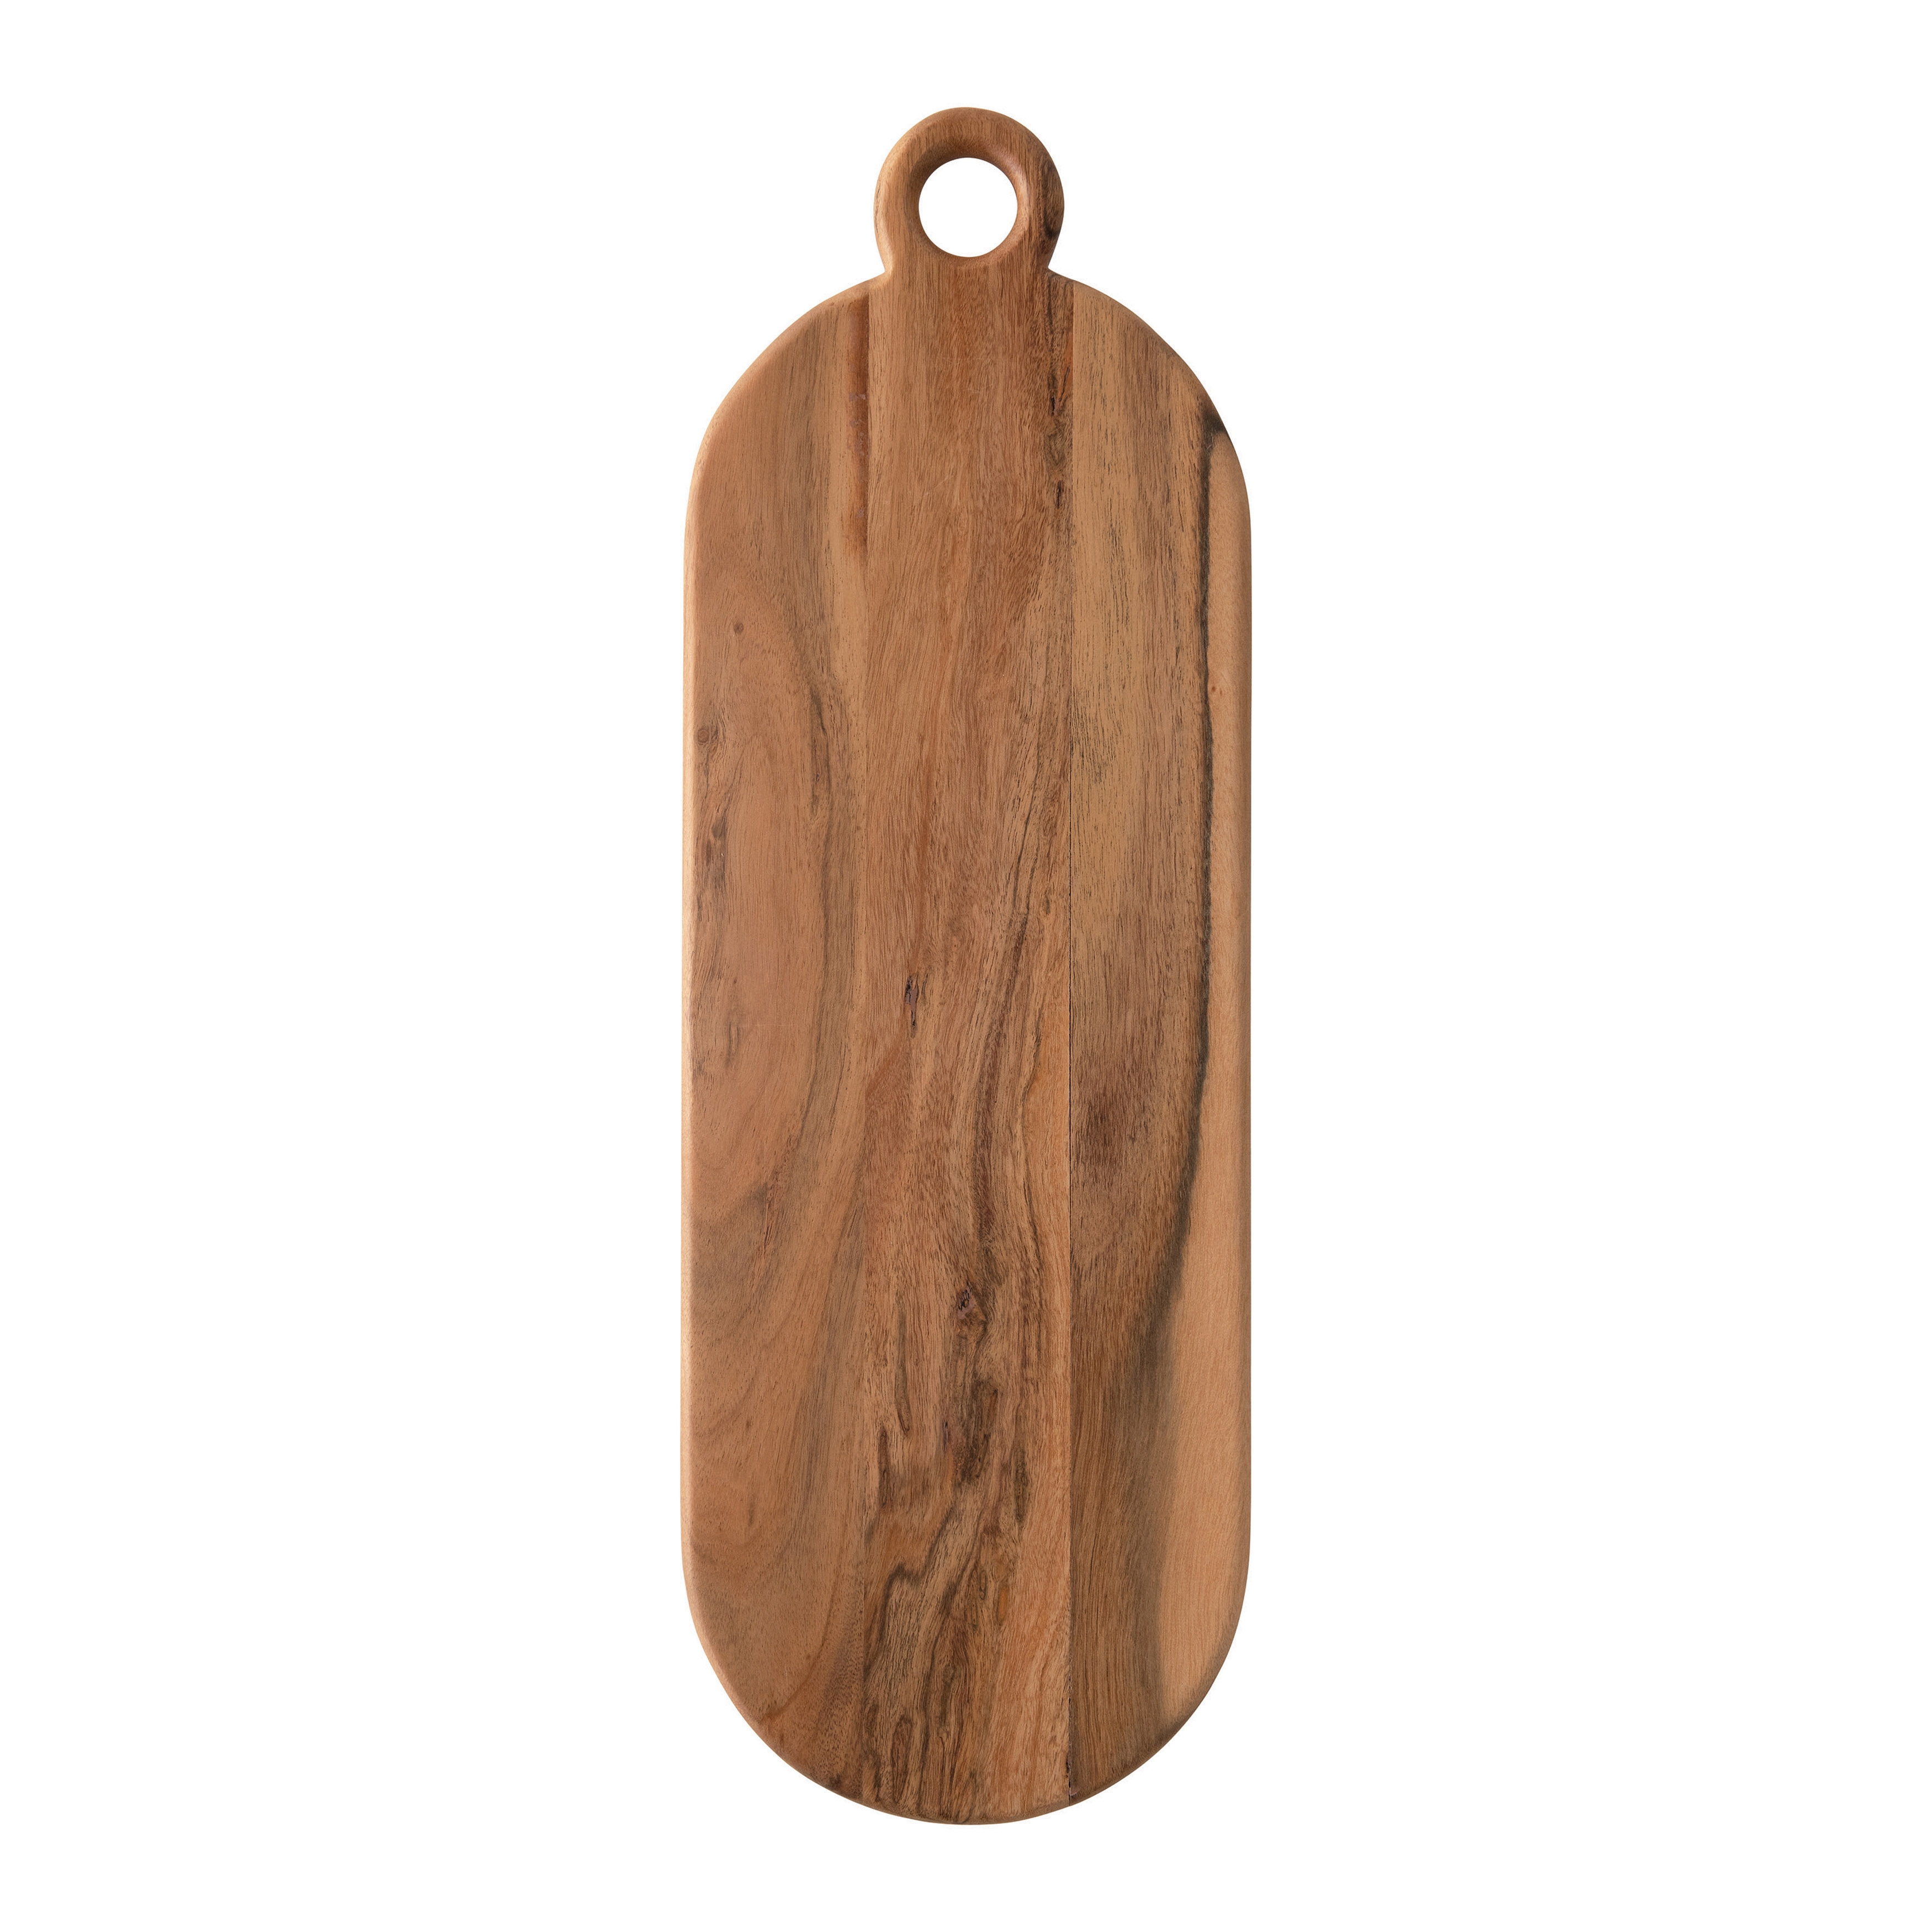 Acacia Wood Cheese/Cutting Board with Handle - Image 0